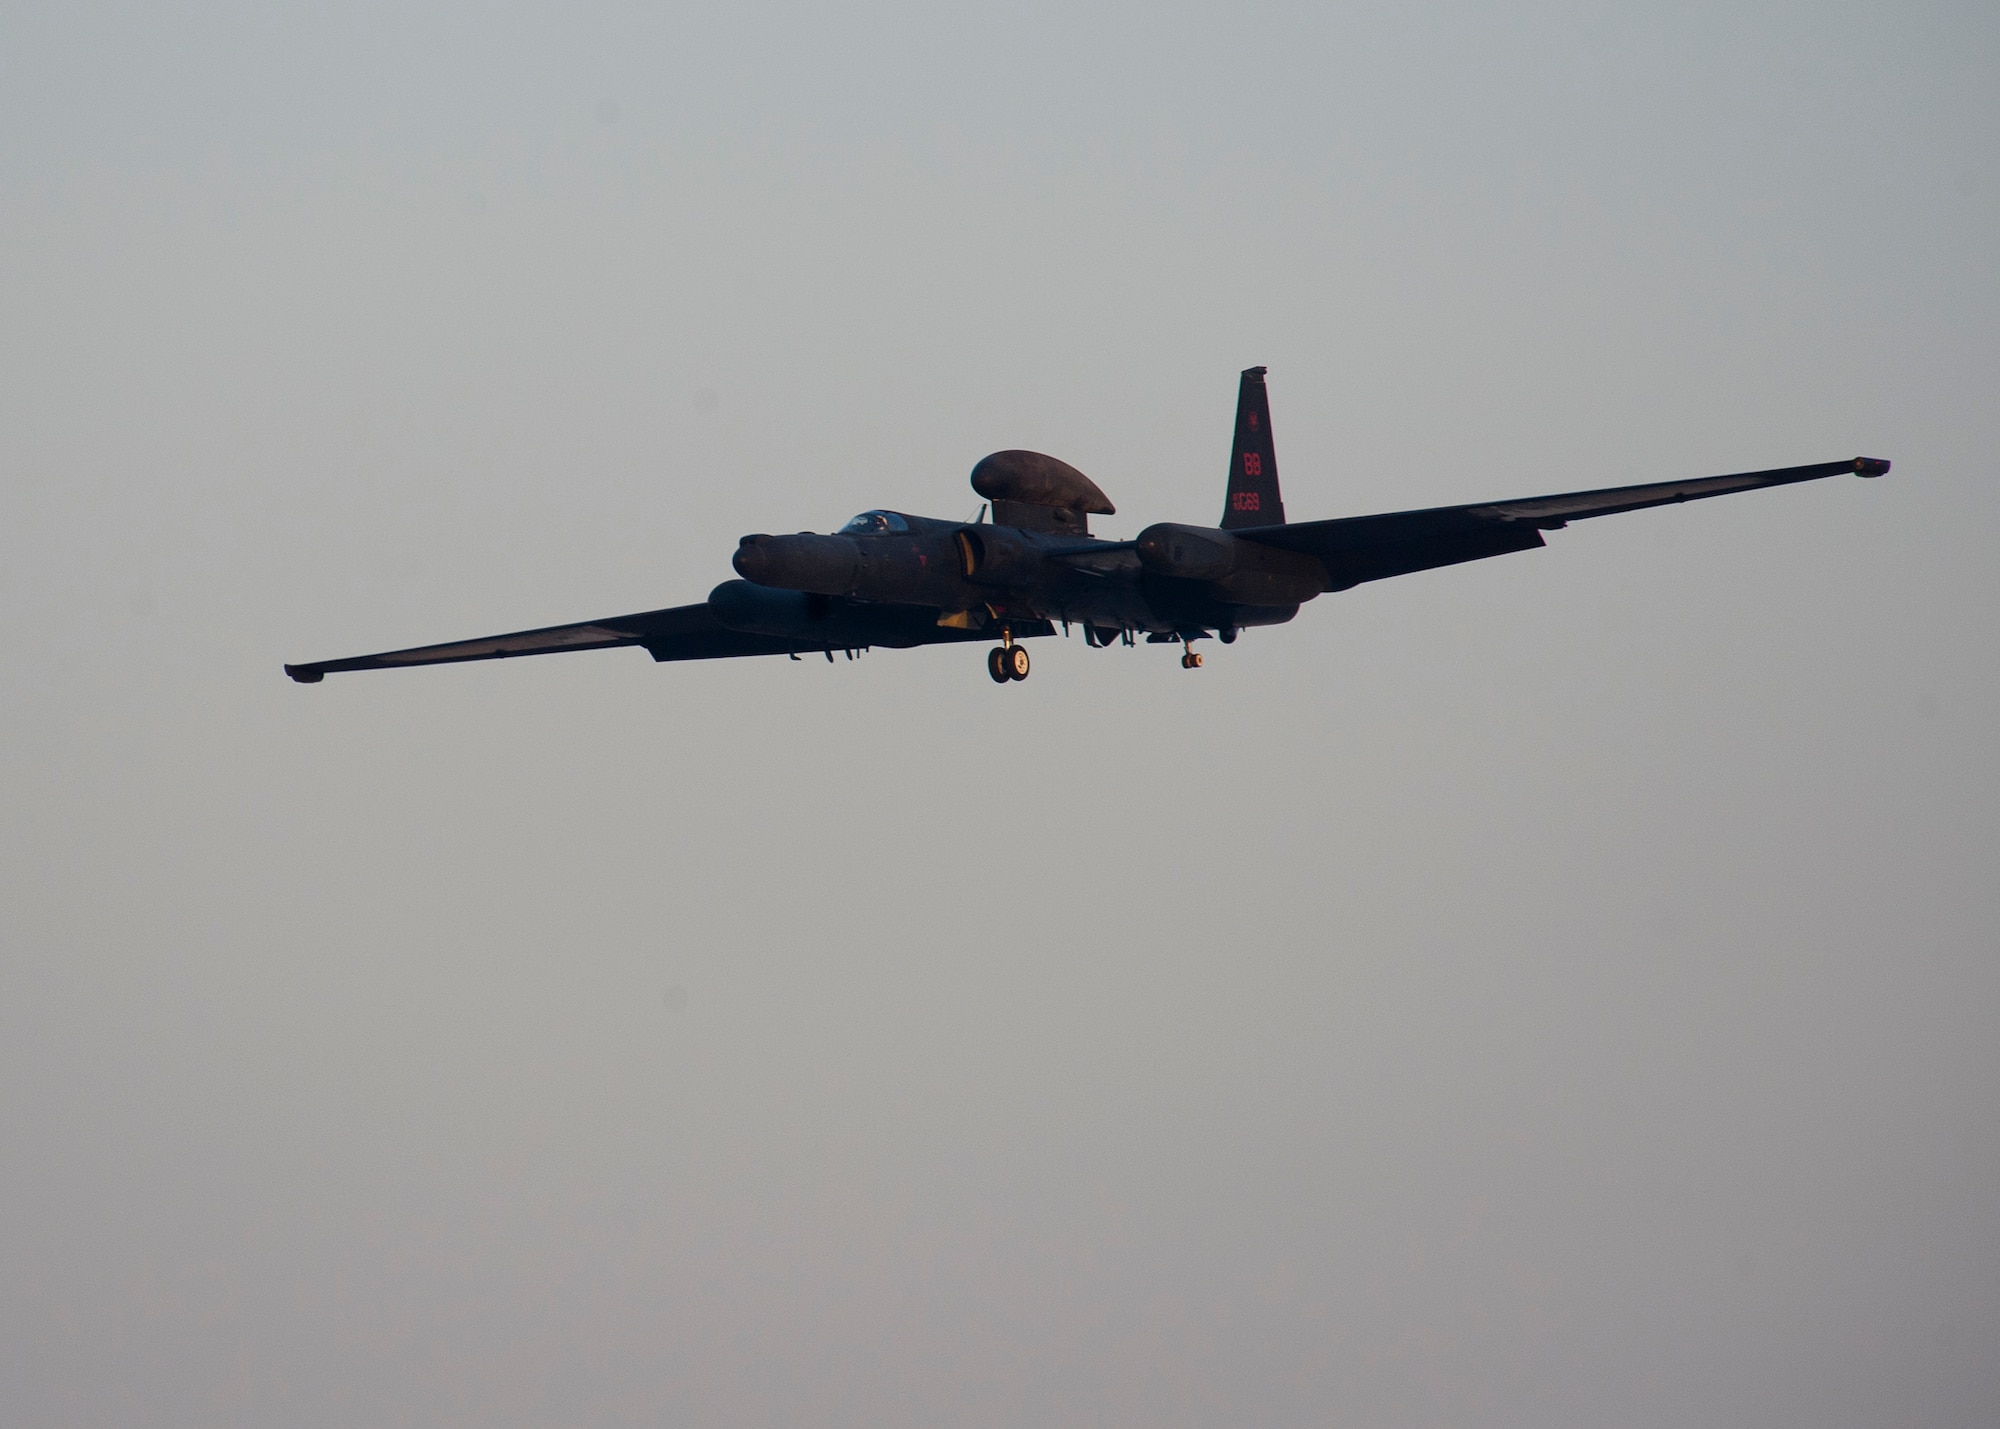 Air Force Maj. Ralph Shoukry, a pilot and tactics and employment lead assigned to the 99th Expeditionary Reconnaissance Squadron, flies a U-2 Dragonlady in for landing after reaching more than 1,000 combat hours at an undisclosed location in Southwest Asia, March 6, 2014. Shoukry reached this feat after his ninth deployment and 113th combat sortie. (U.S. Air Force photo by Staff Sgt. Michael Means/Released)